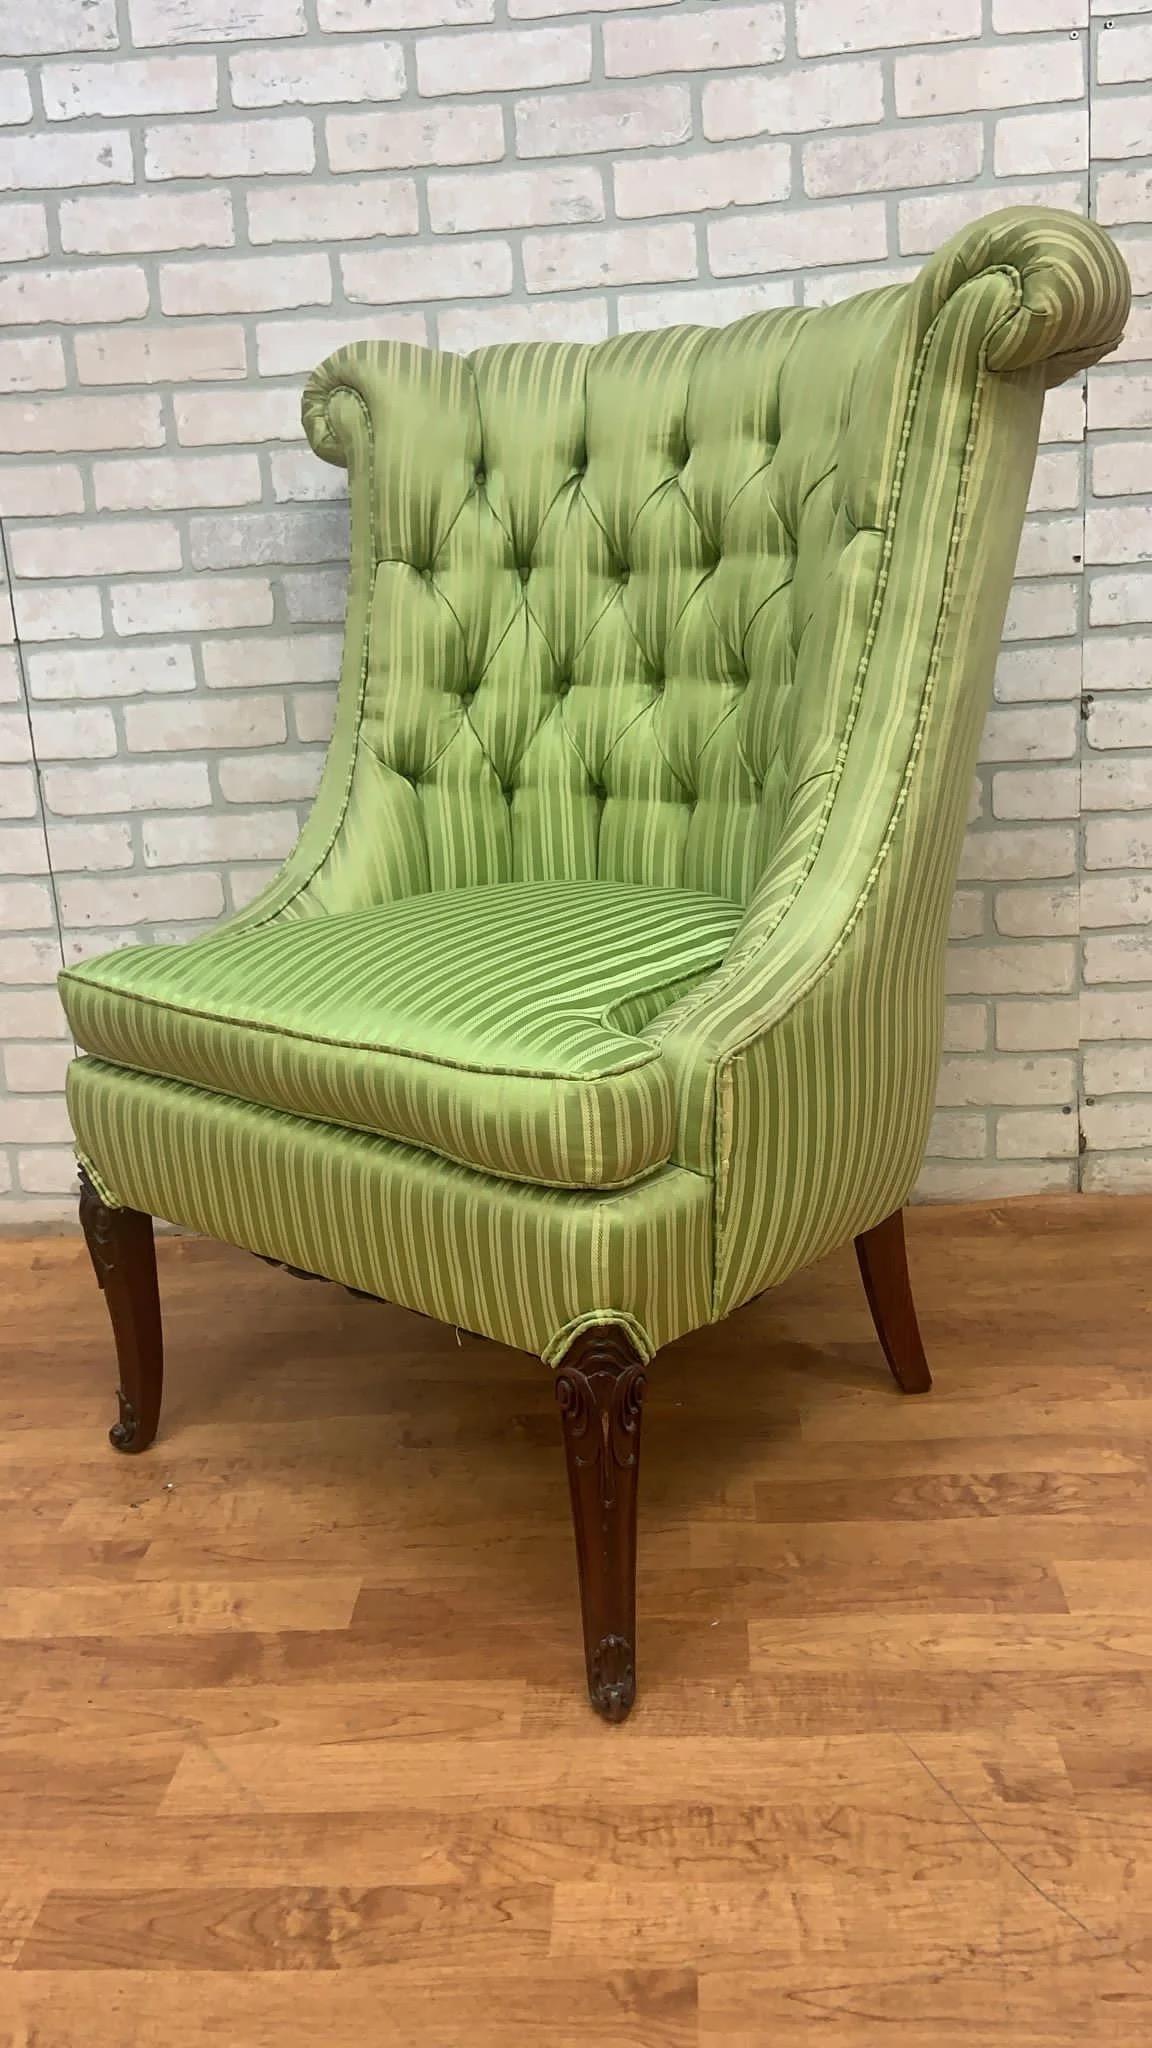 Vintage Queen Anne Style Rolled Back Tufted Wingback Chairs - Pair

These Queen Anne Style Rolled Back Tufted Wingback Chairs showcase a timeless design characterized by their high, winged backrests and curved lines. The green striped fabric